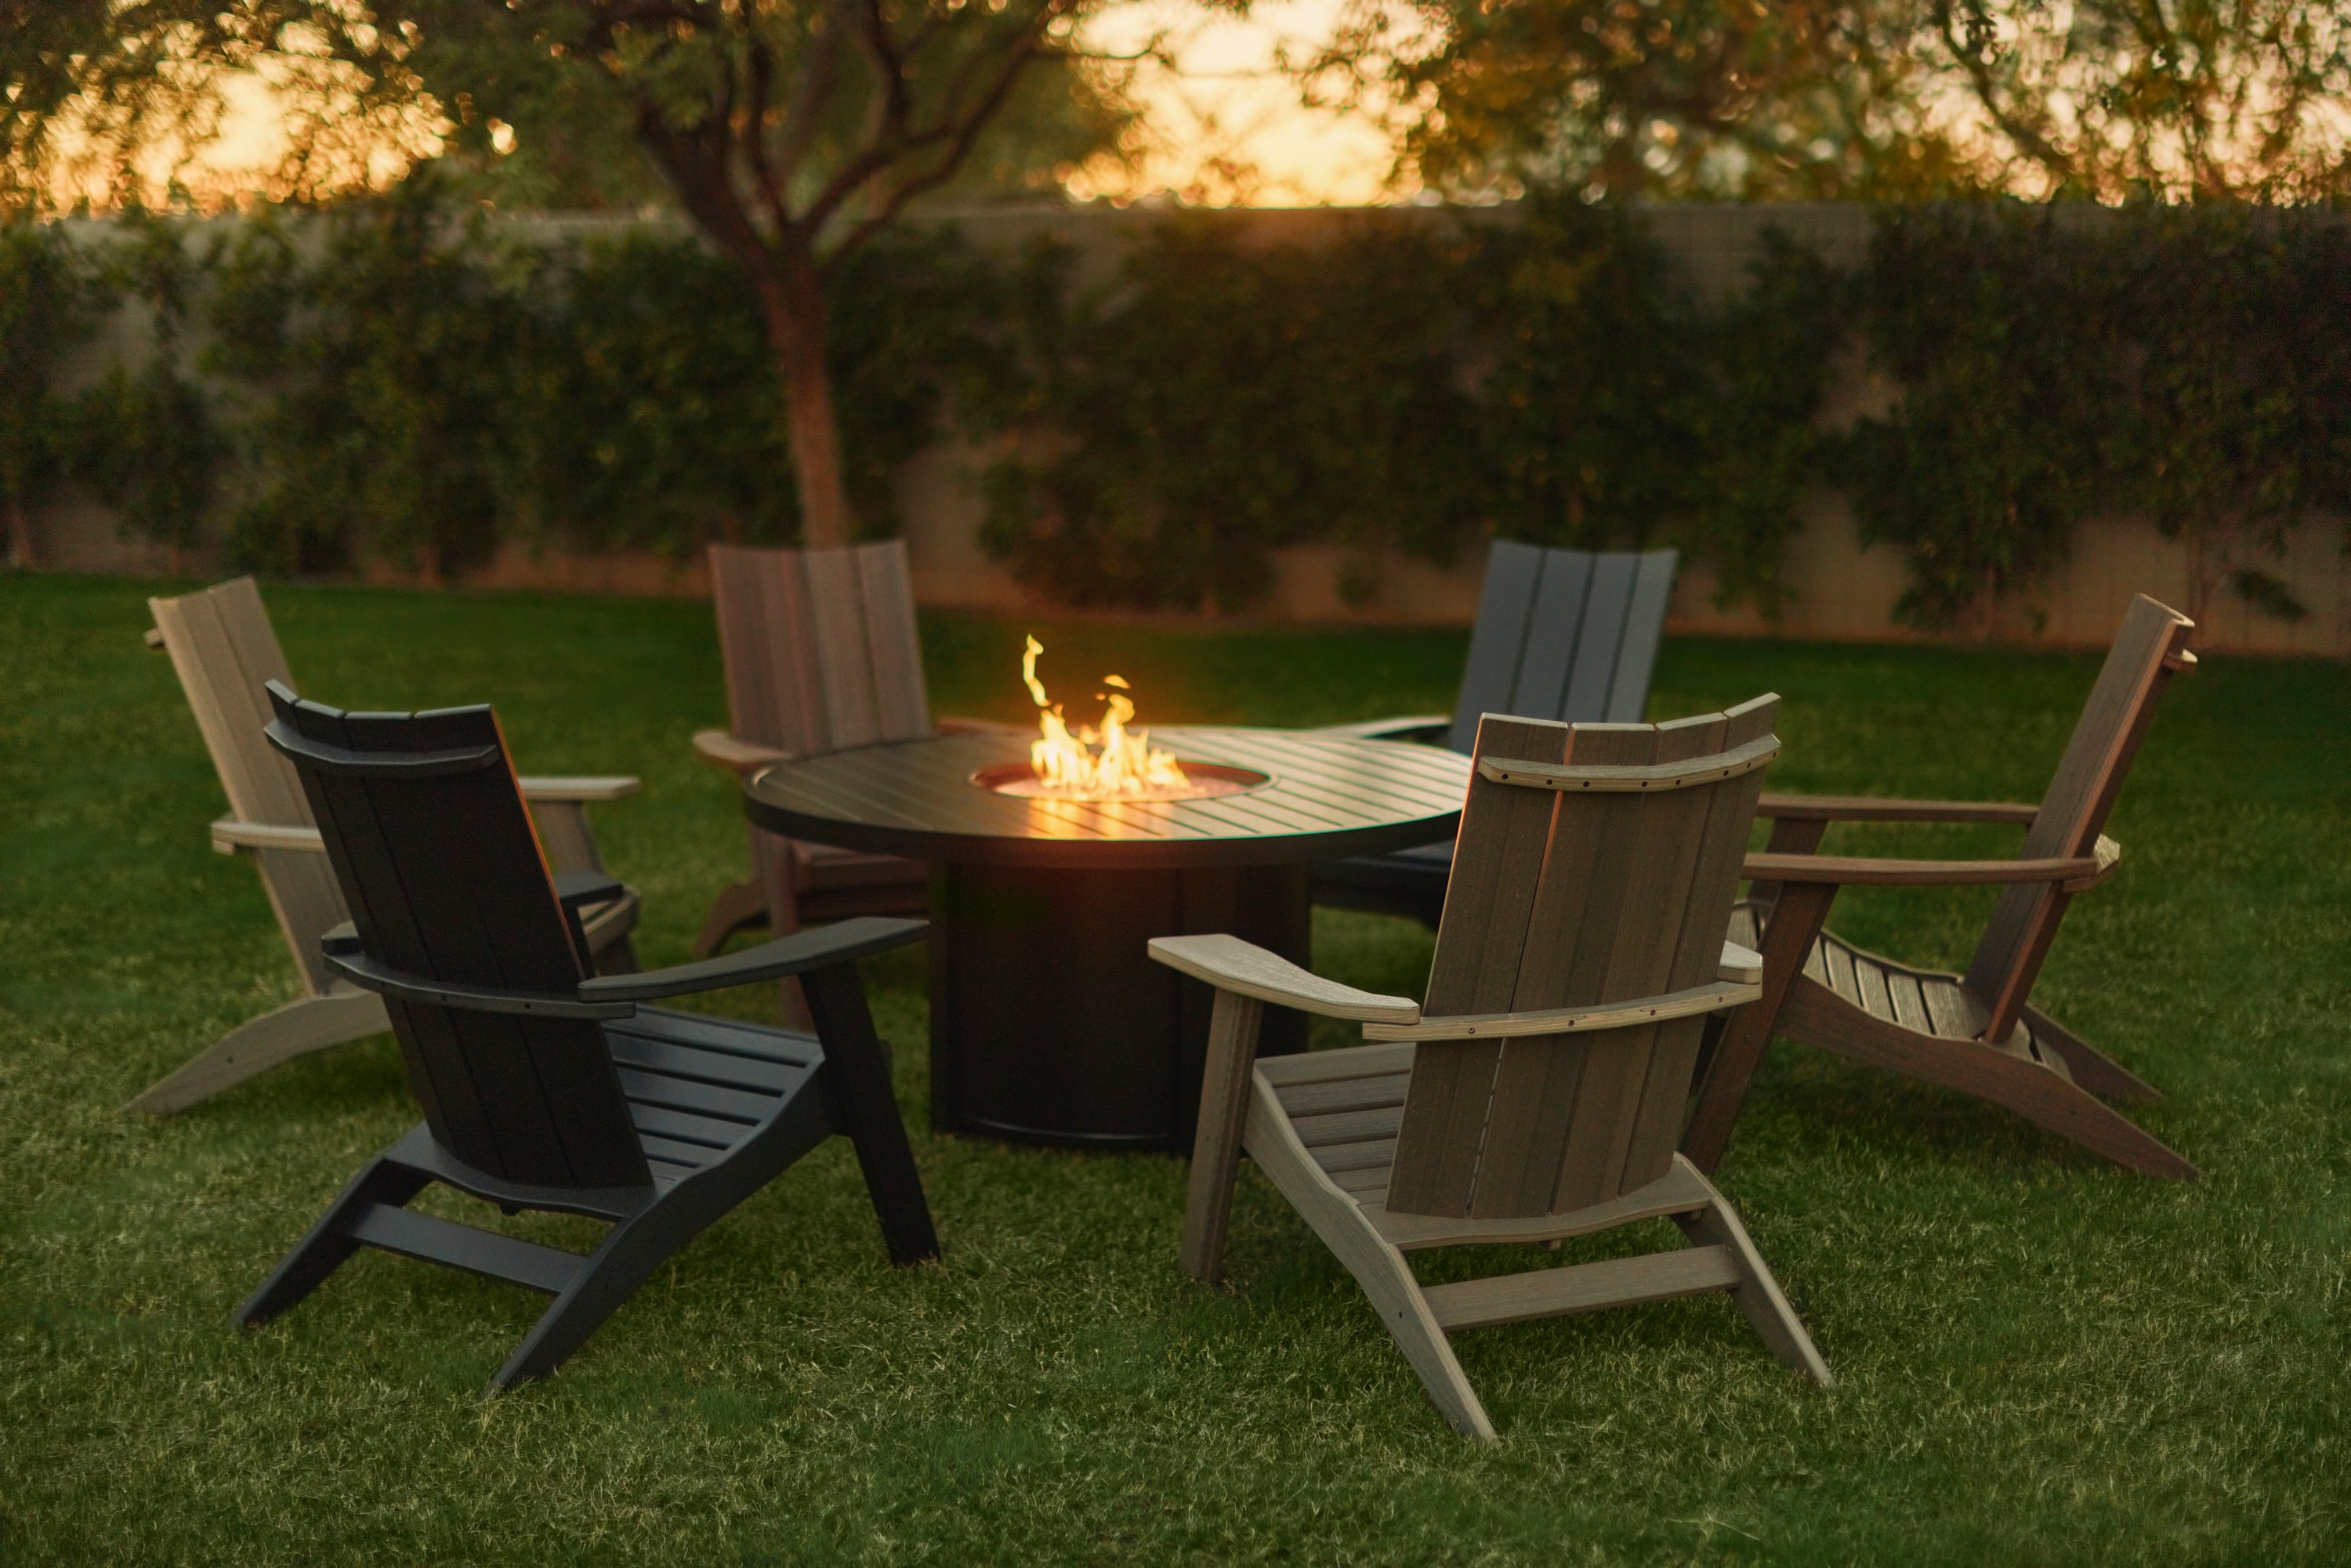 California Style Adirondack Chairs Around a Bliss Fire Pit Table